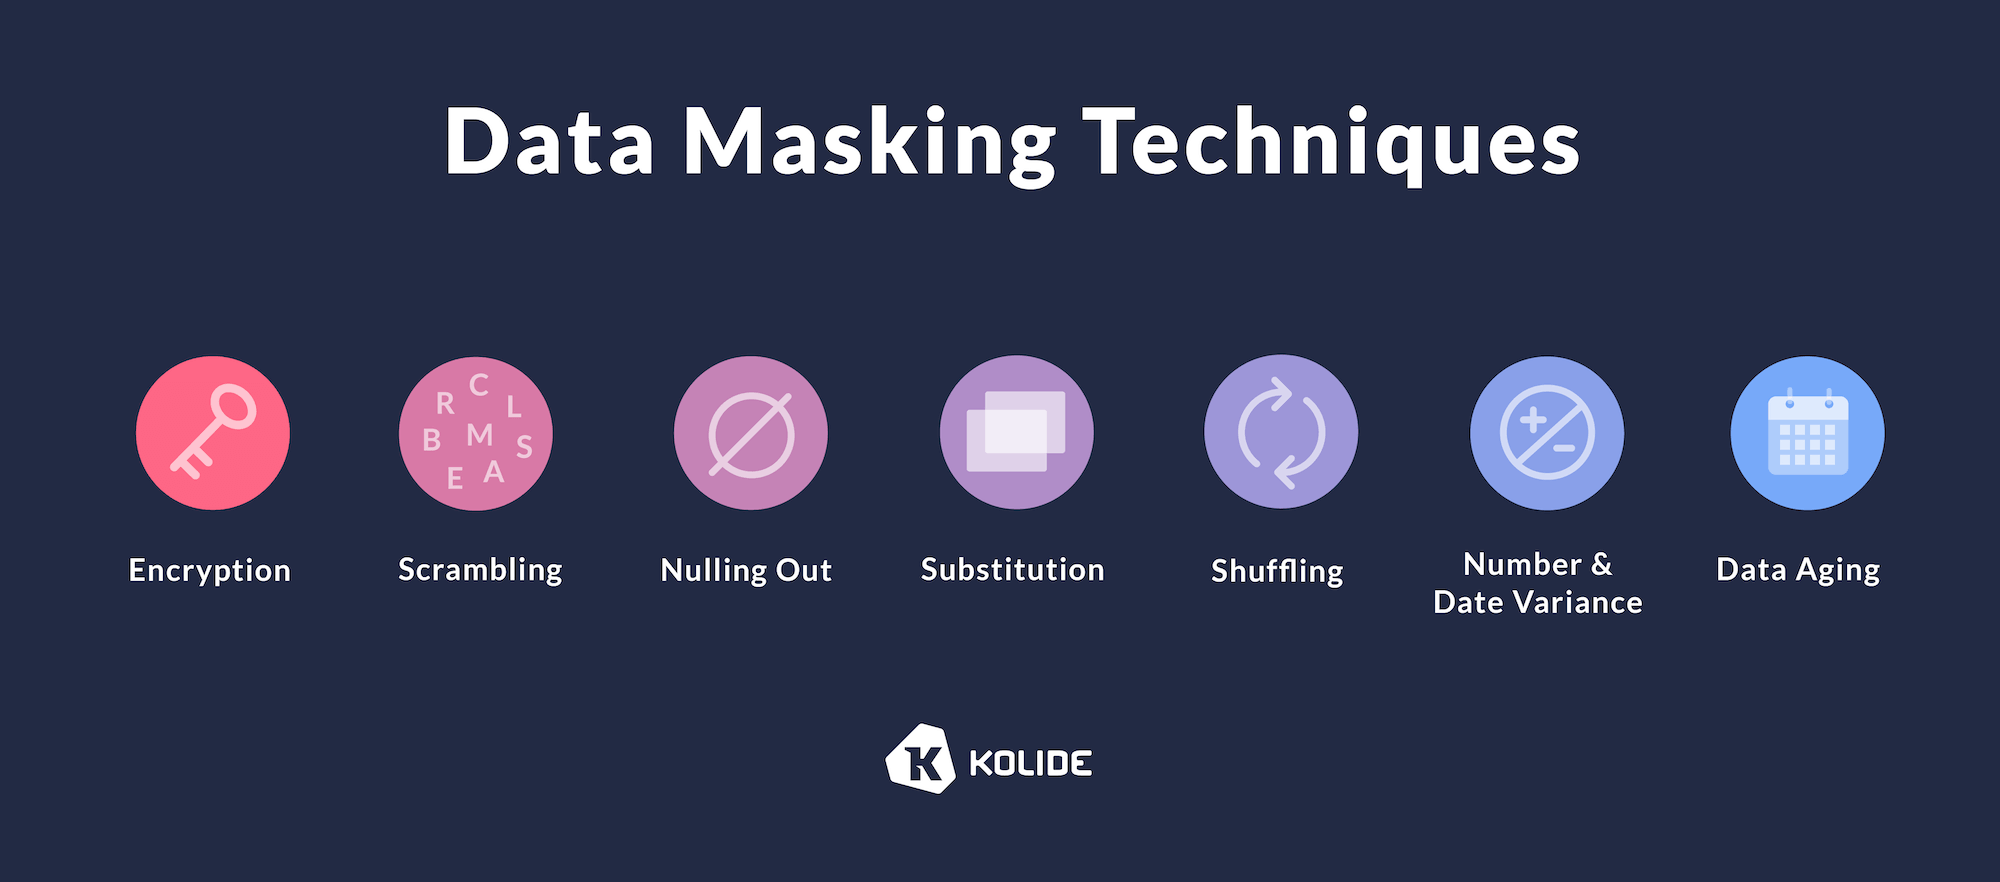 An ideographic showing data masking techniques. The image has icons associated with each technique. The techniques are: encryption, scrambling, nulling out, substitution, shuffling, number and date variance, data aging